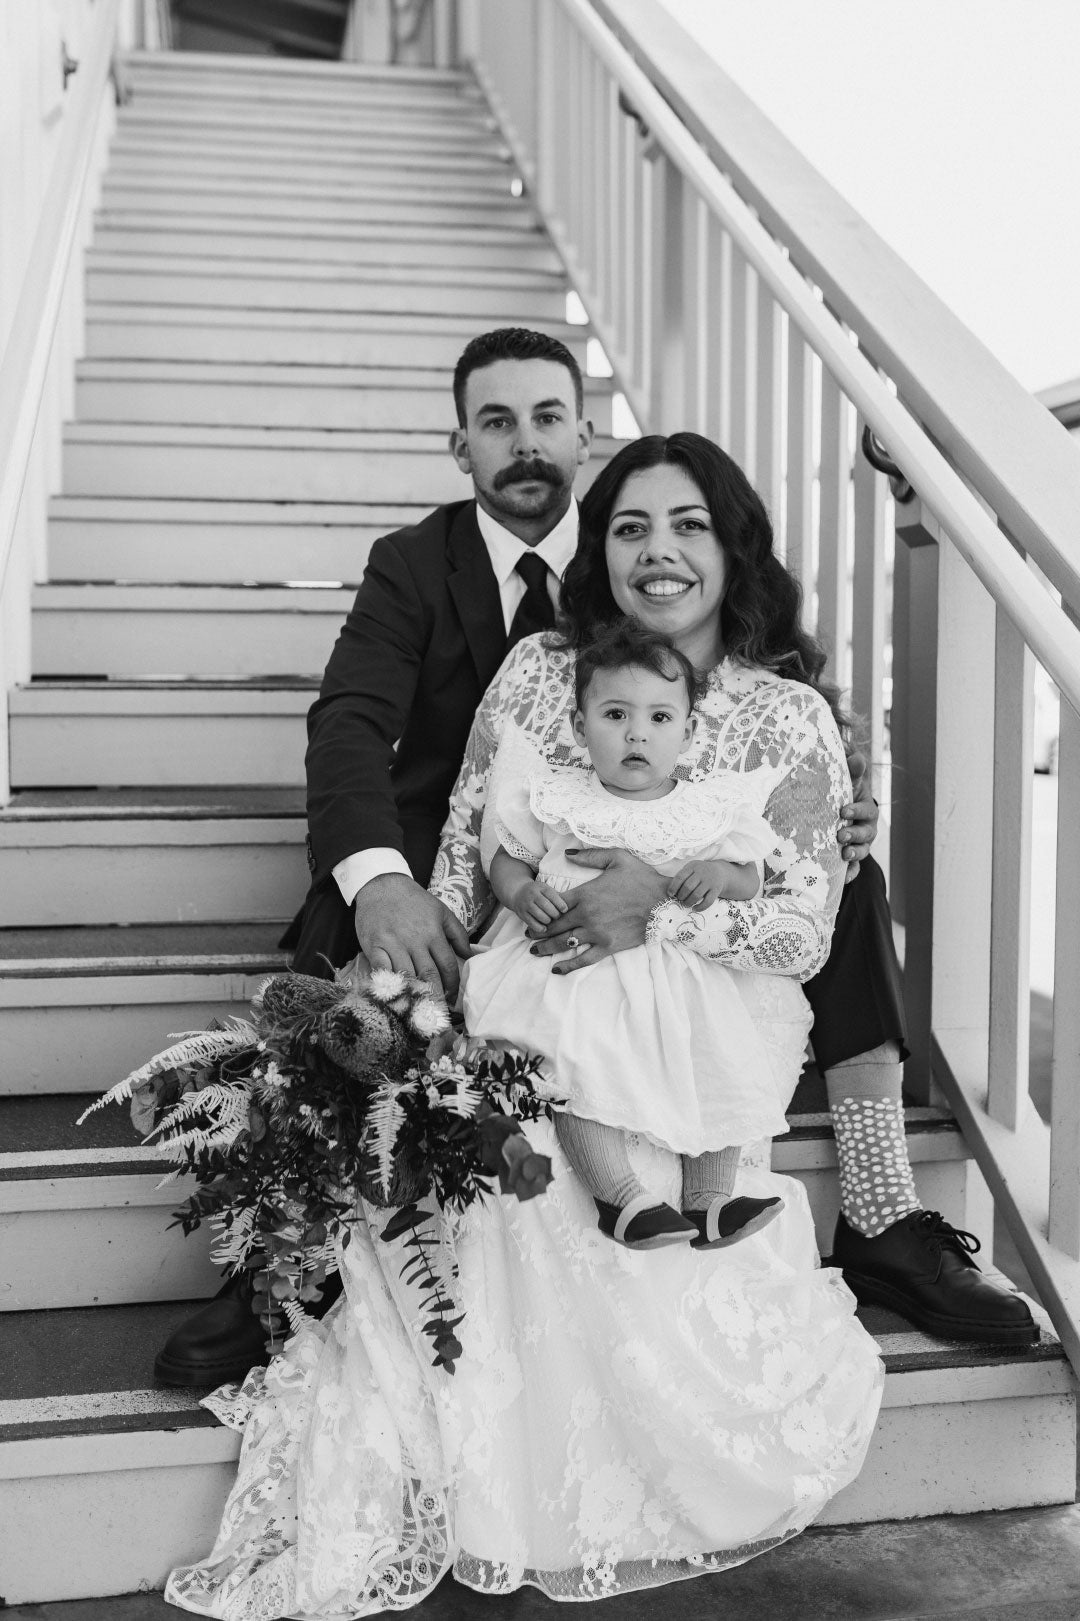 Groom and Bride sitting on stairs with baby